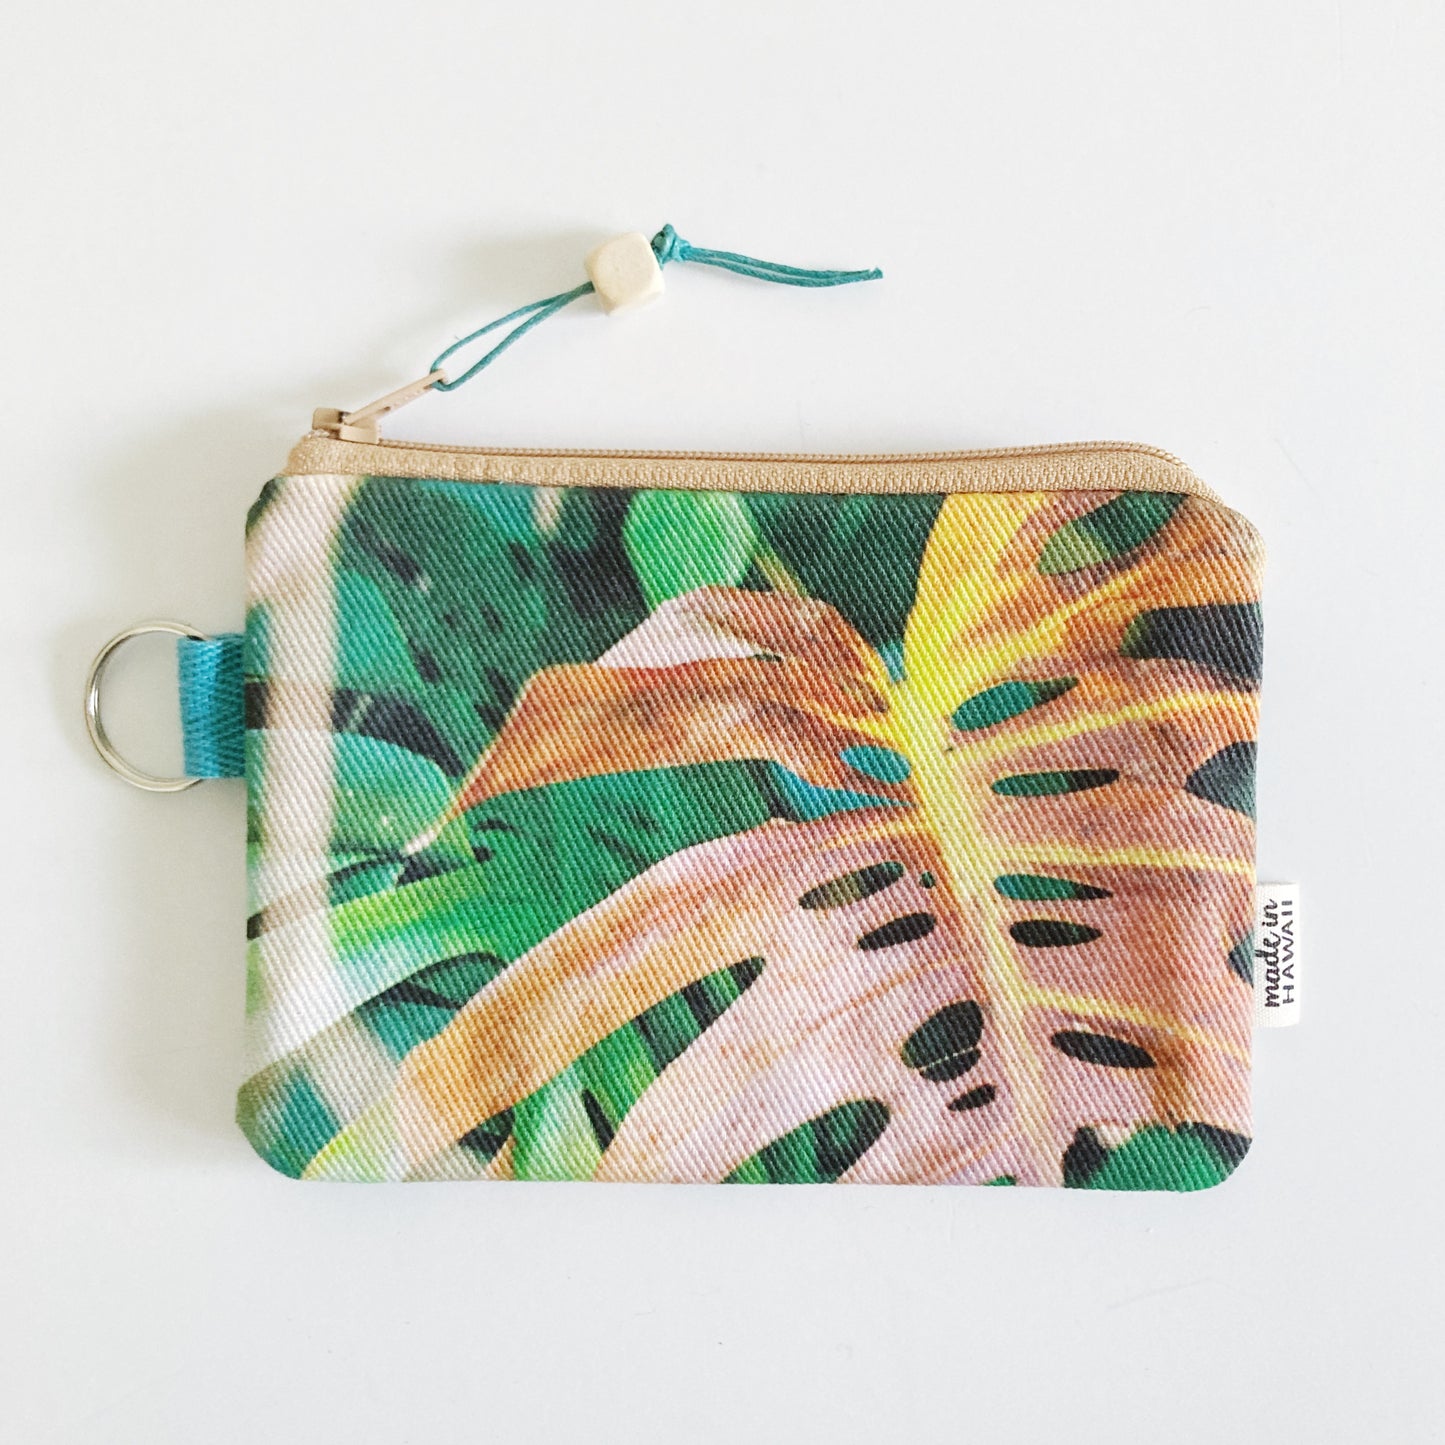 Mahea Pouch // BROWN MONSTERA 2 // Made in Hawaii with Aloha